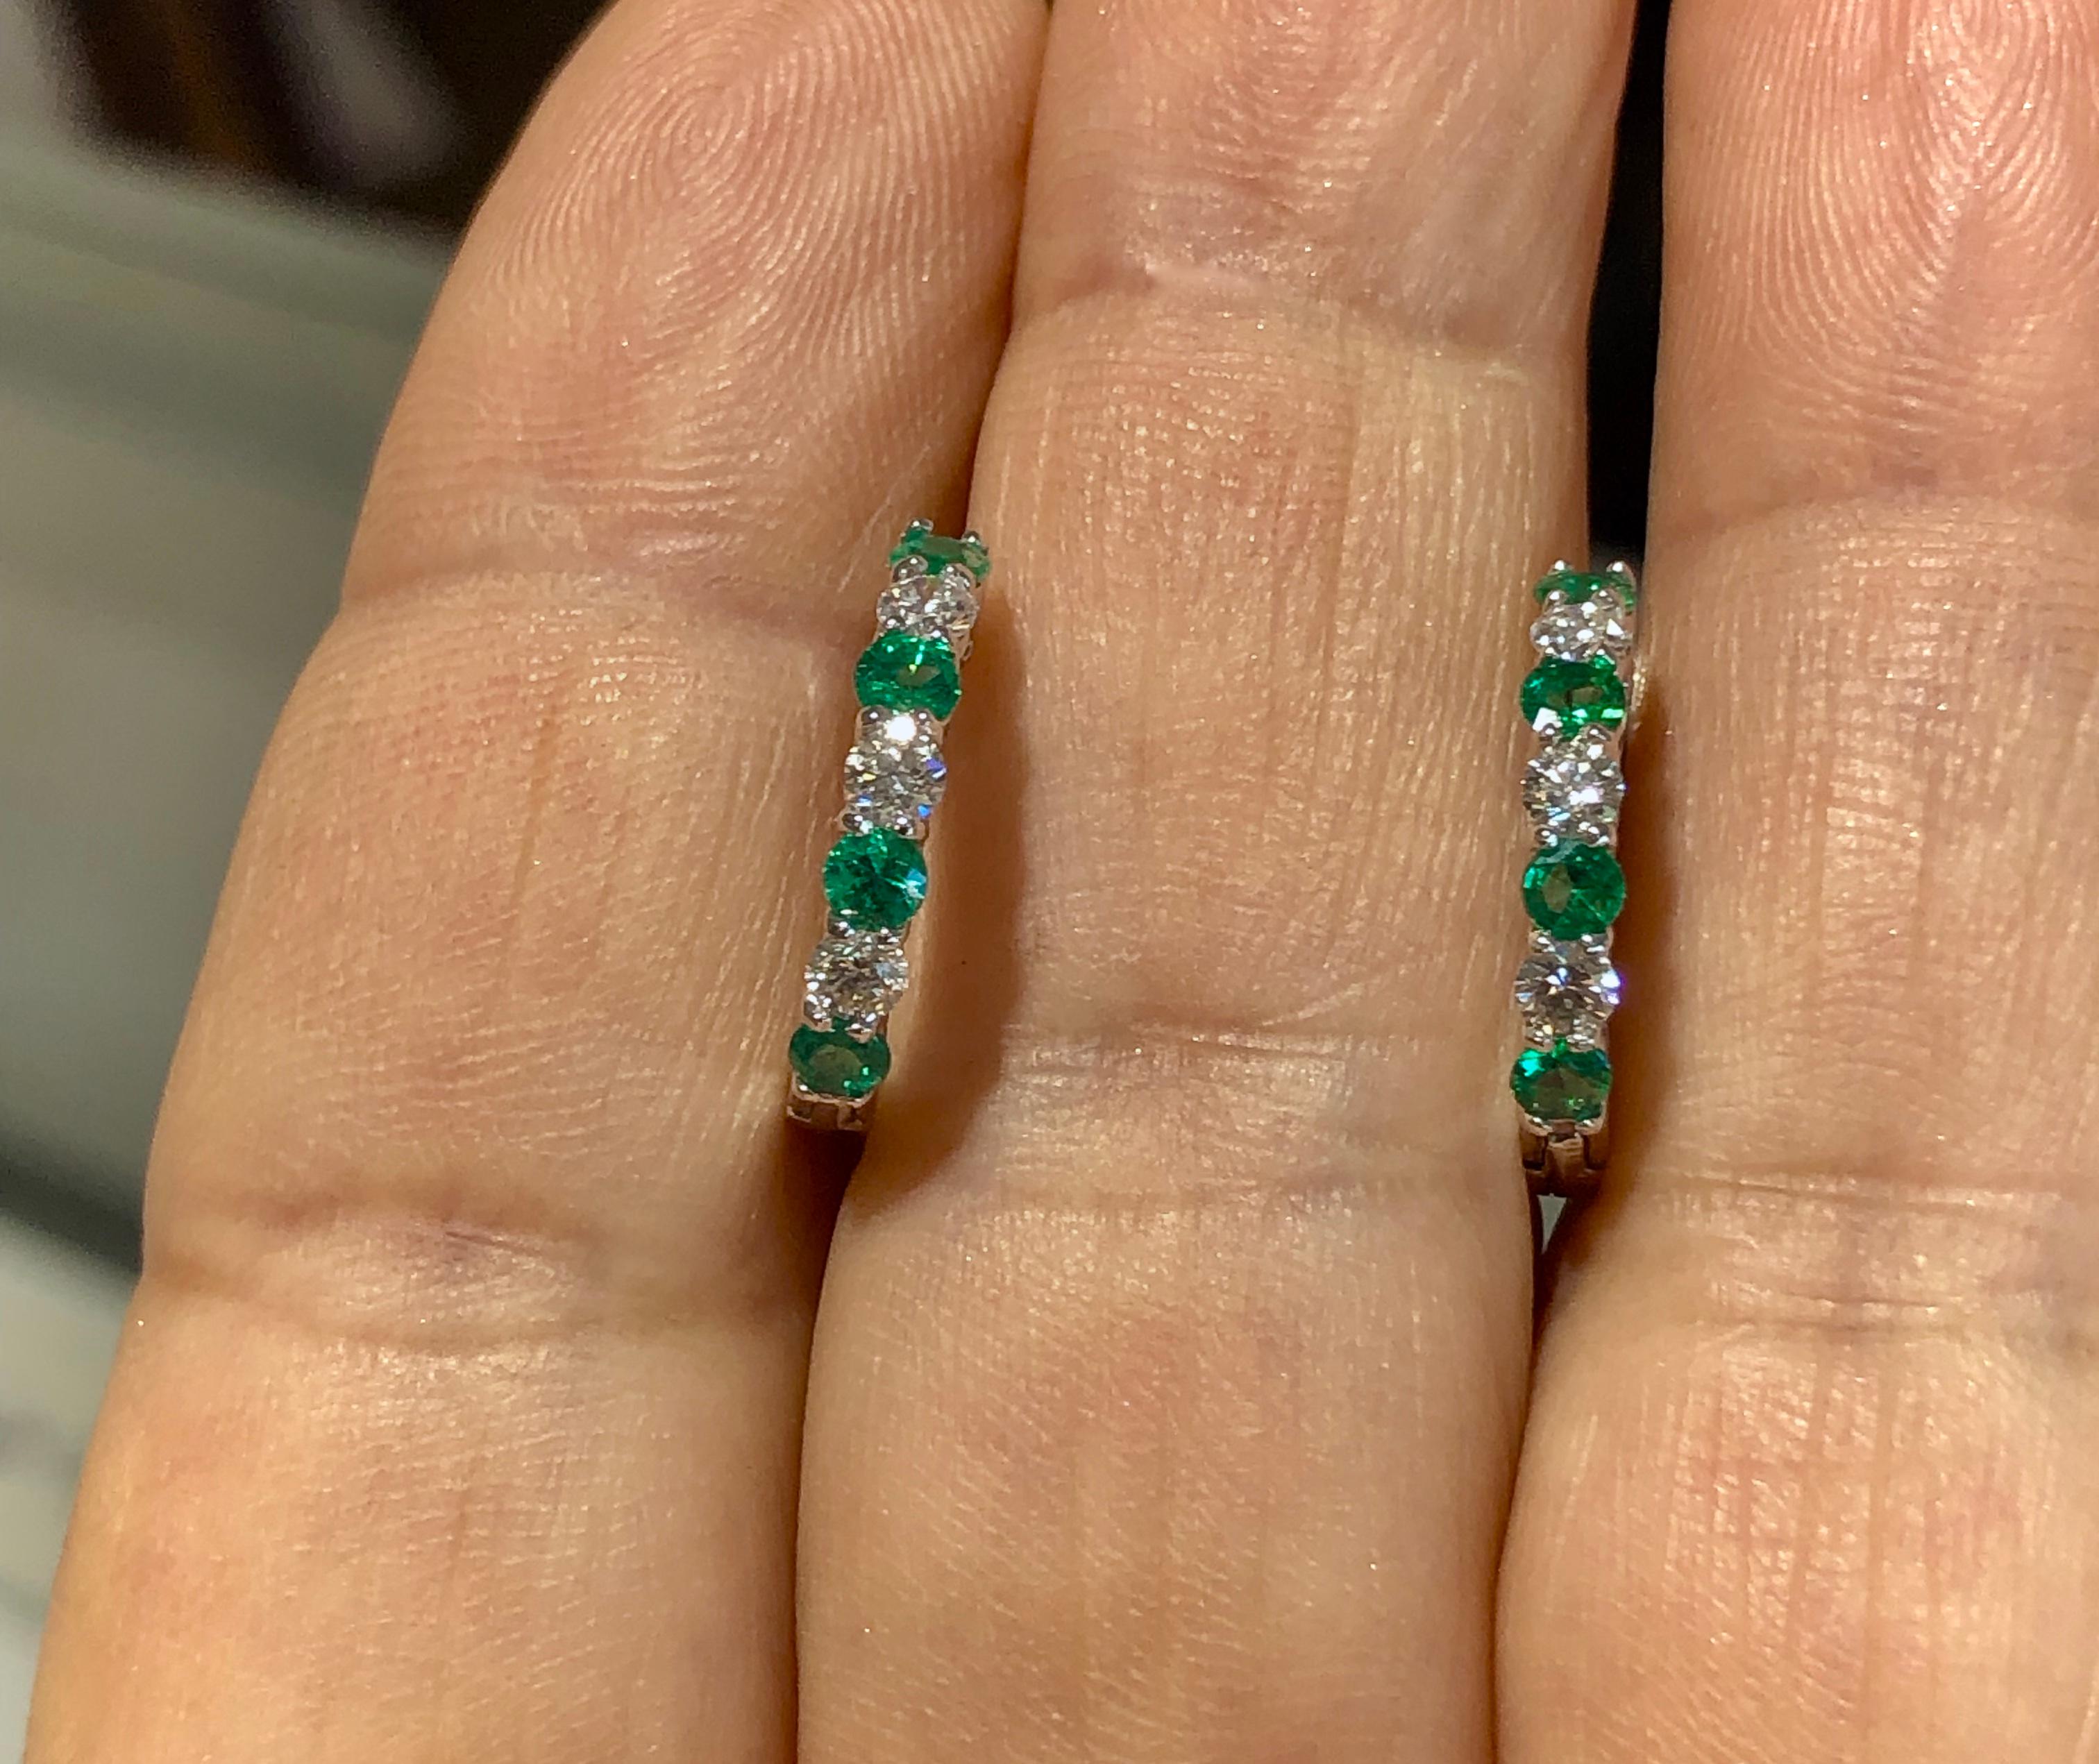 1.00 Carat Emerald & Diamond White Gold Hoop Earrings. These beautiful earrings contain round shape natural Colombian emeralds with a total weight of 0.60 cts. In between each emerald is a round shape natural diamond with a total weight of 0.40cts.